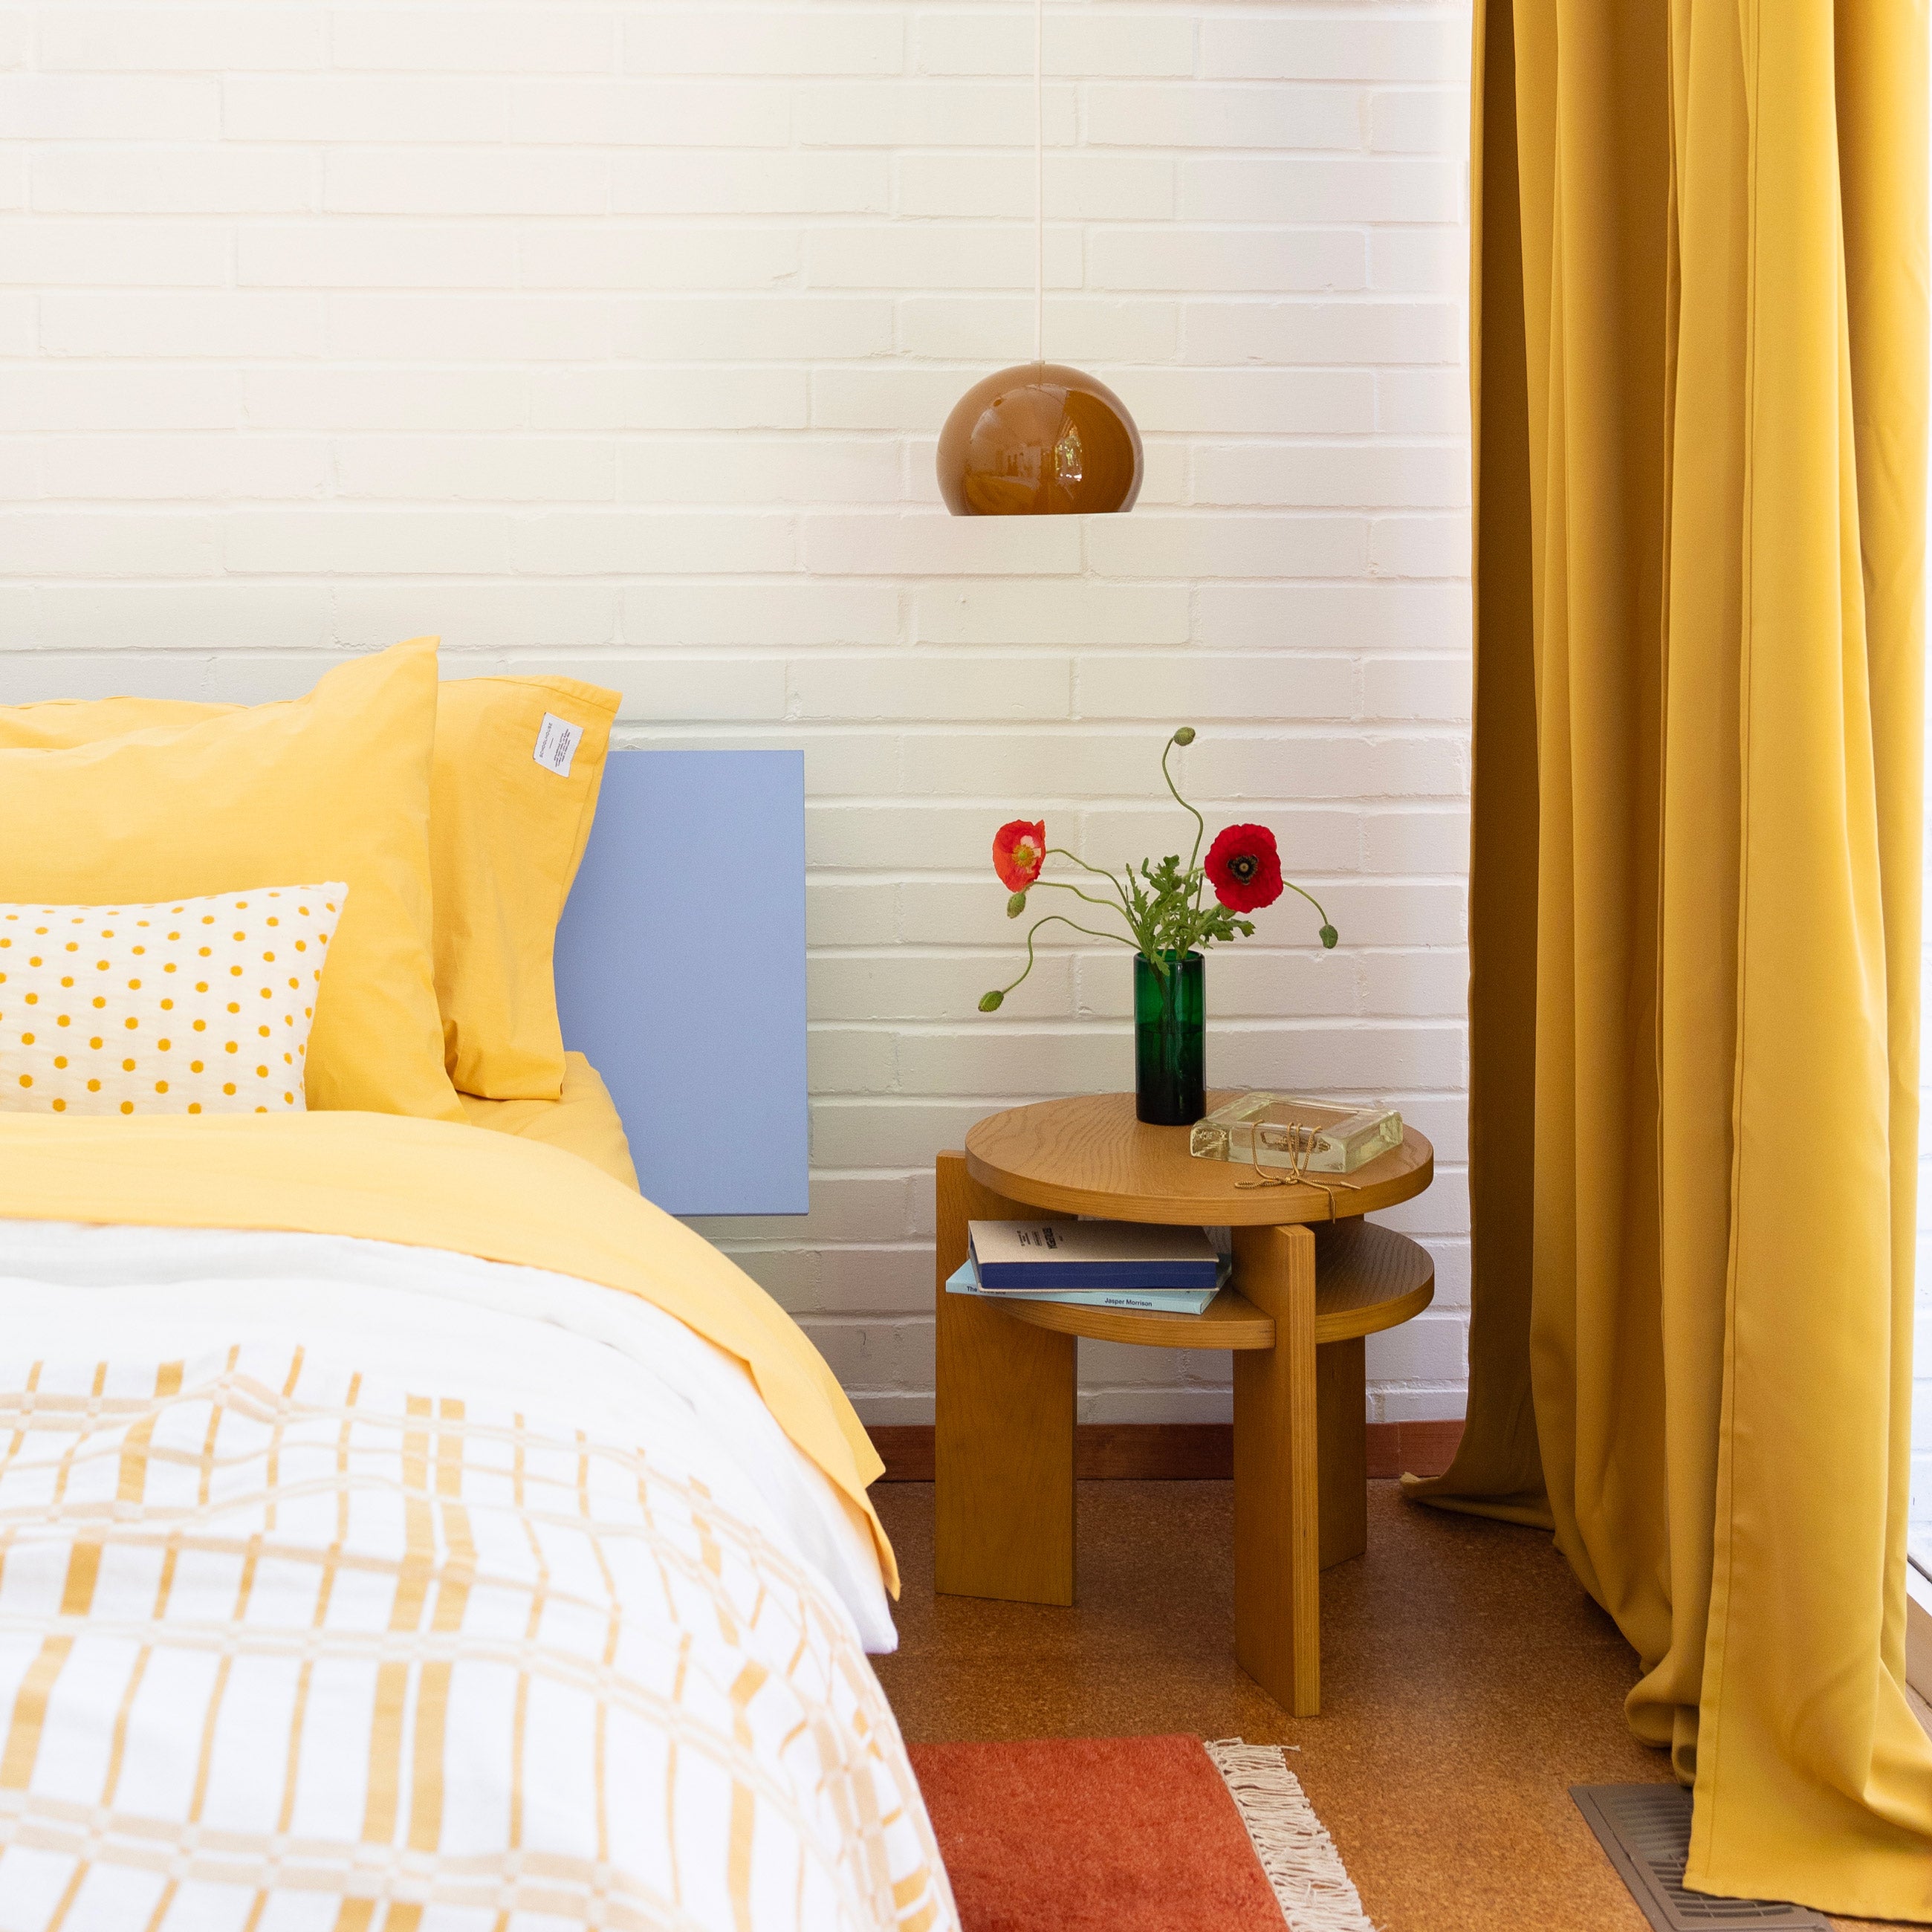 Cozy quilt on bed in bright, colorful bedroom. 